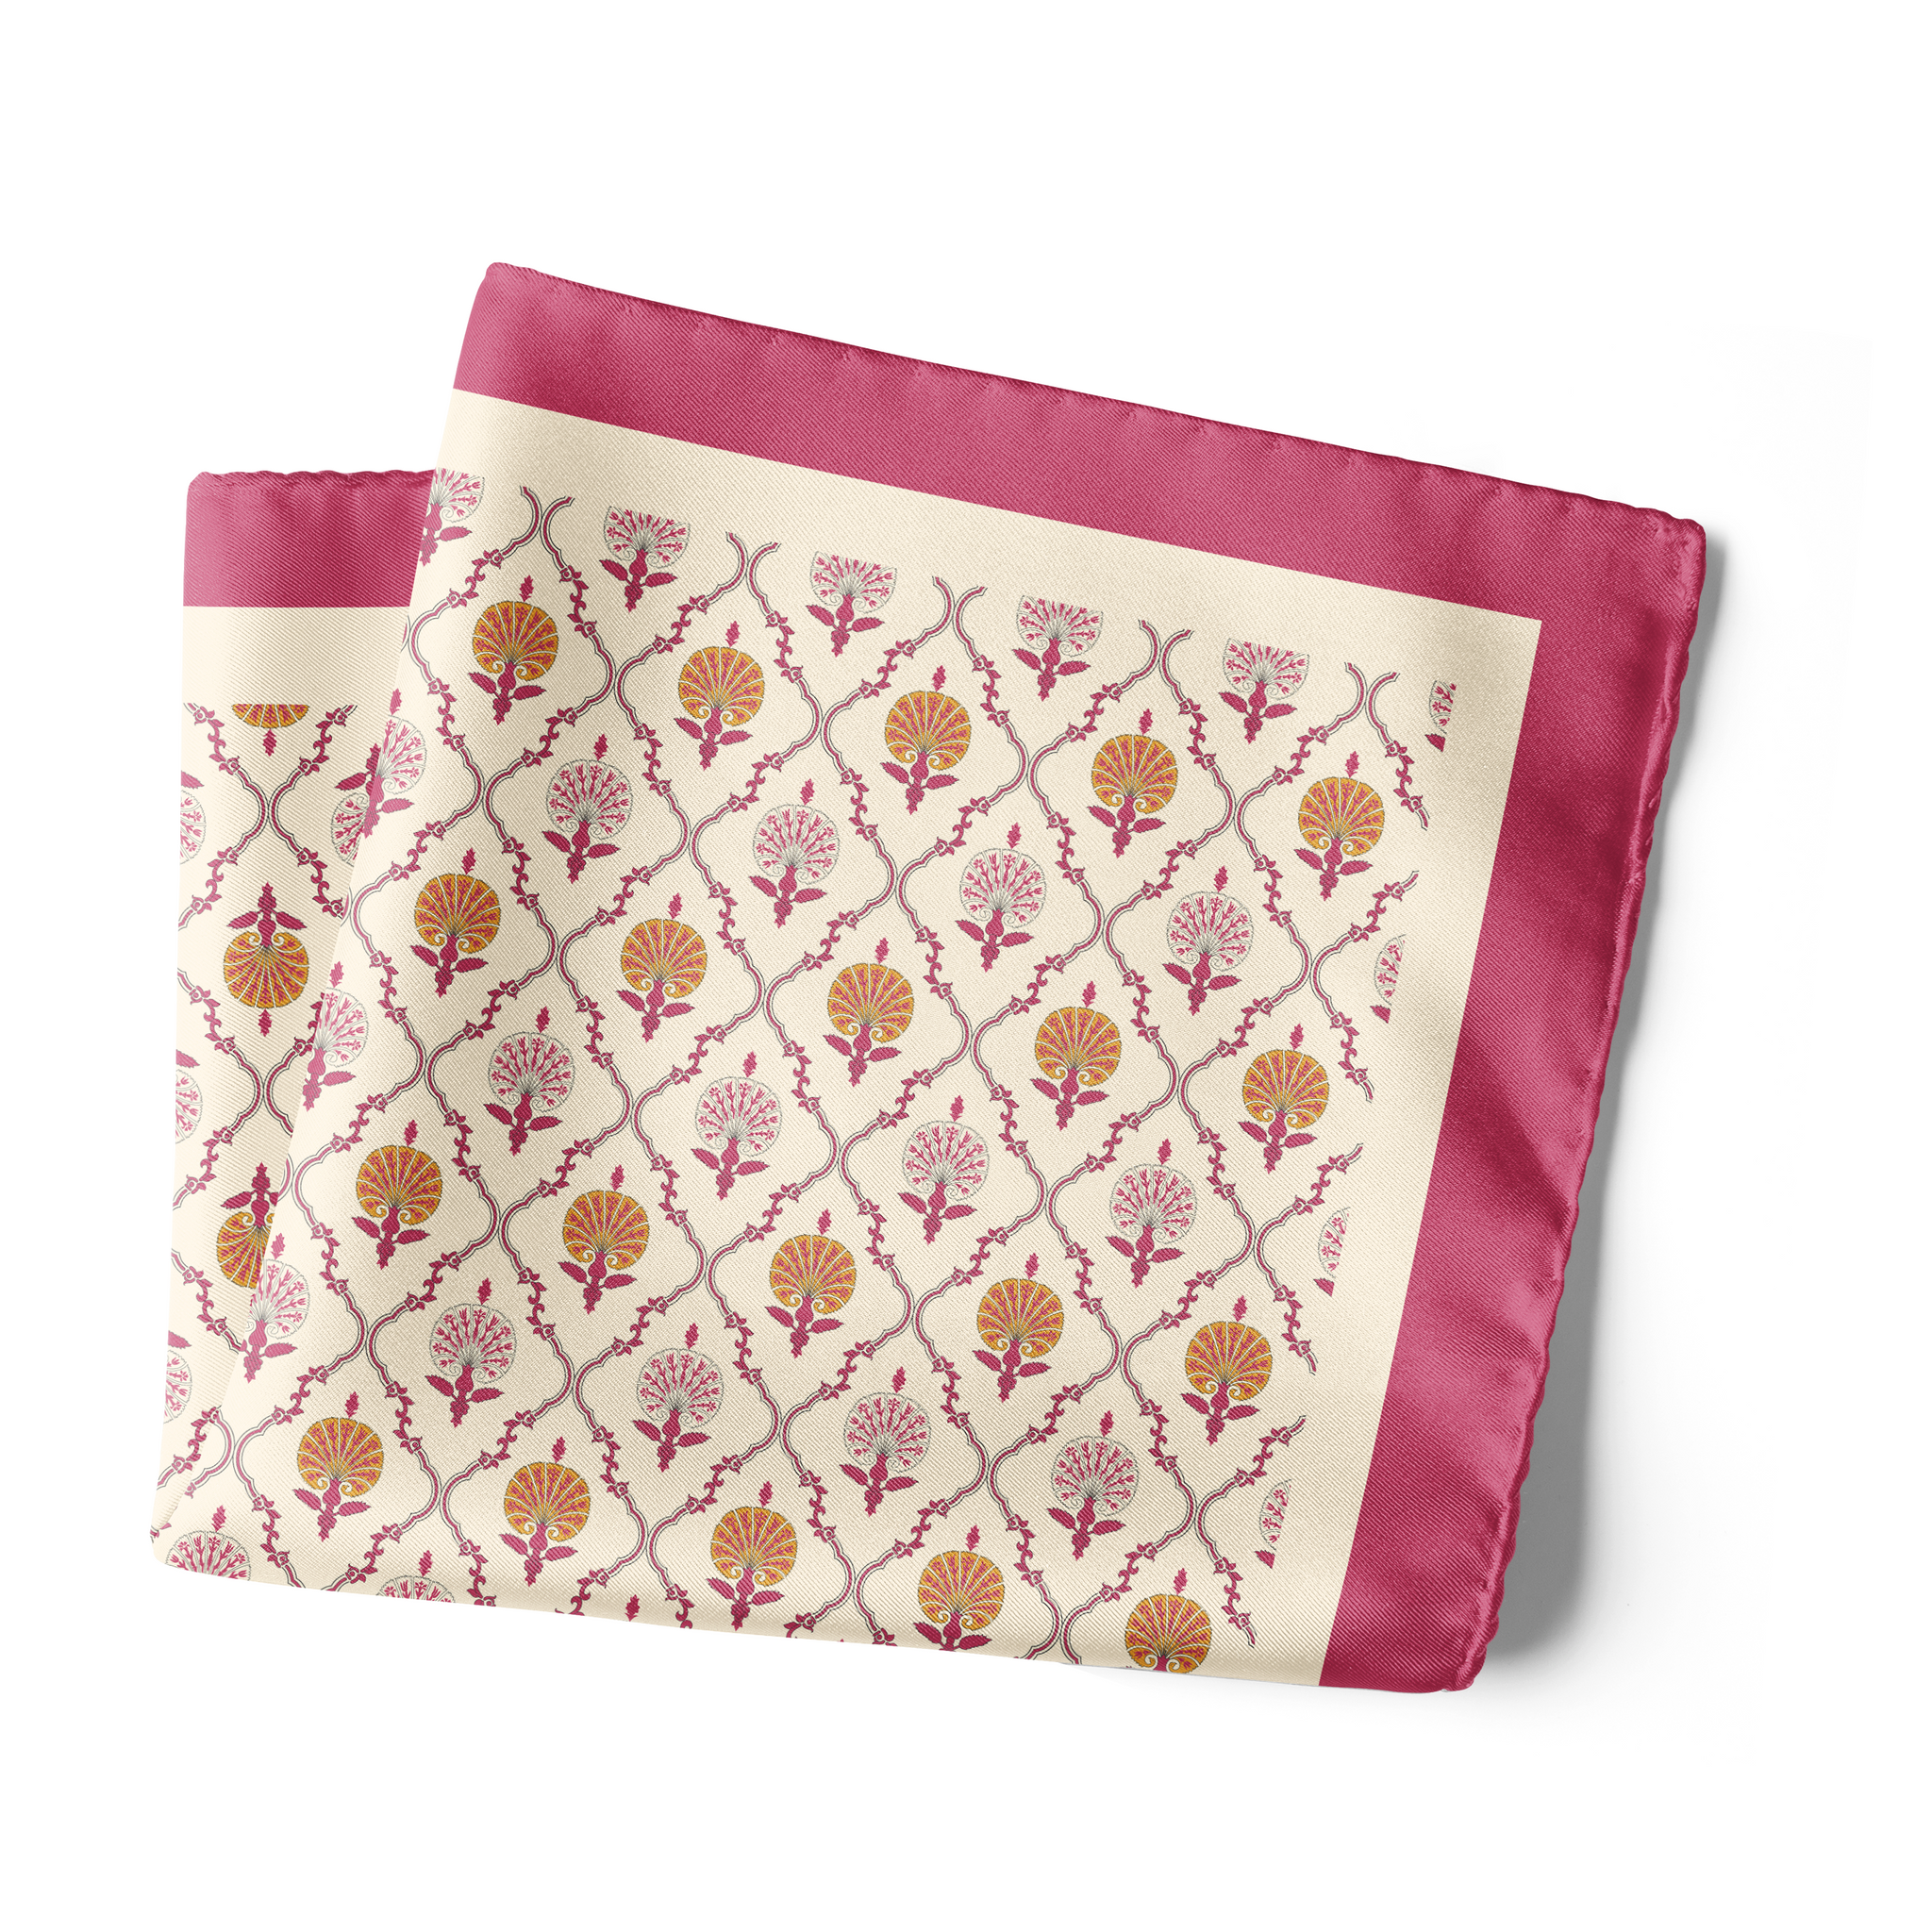 Chokore Pink Satin Silk pocket square from the Indian at Heart Collection